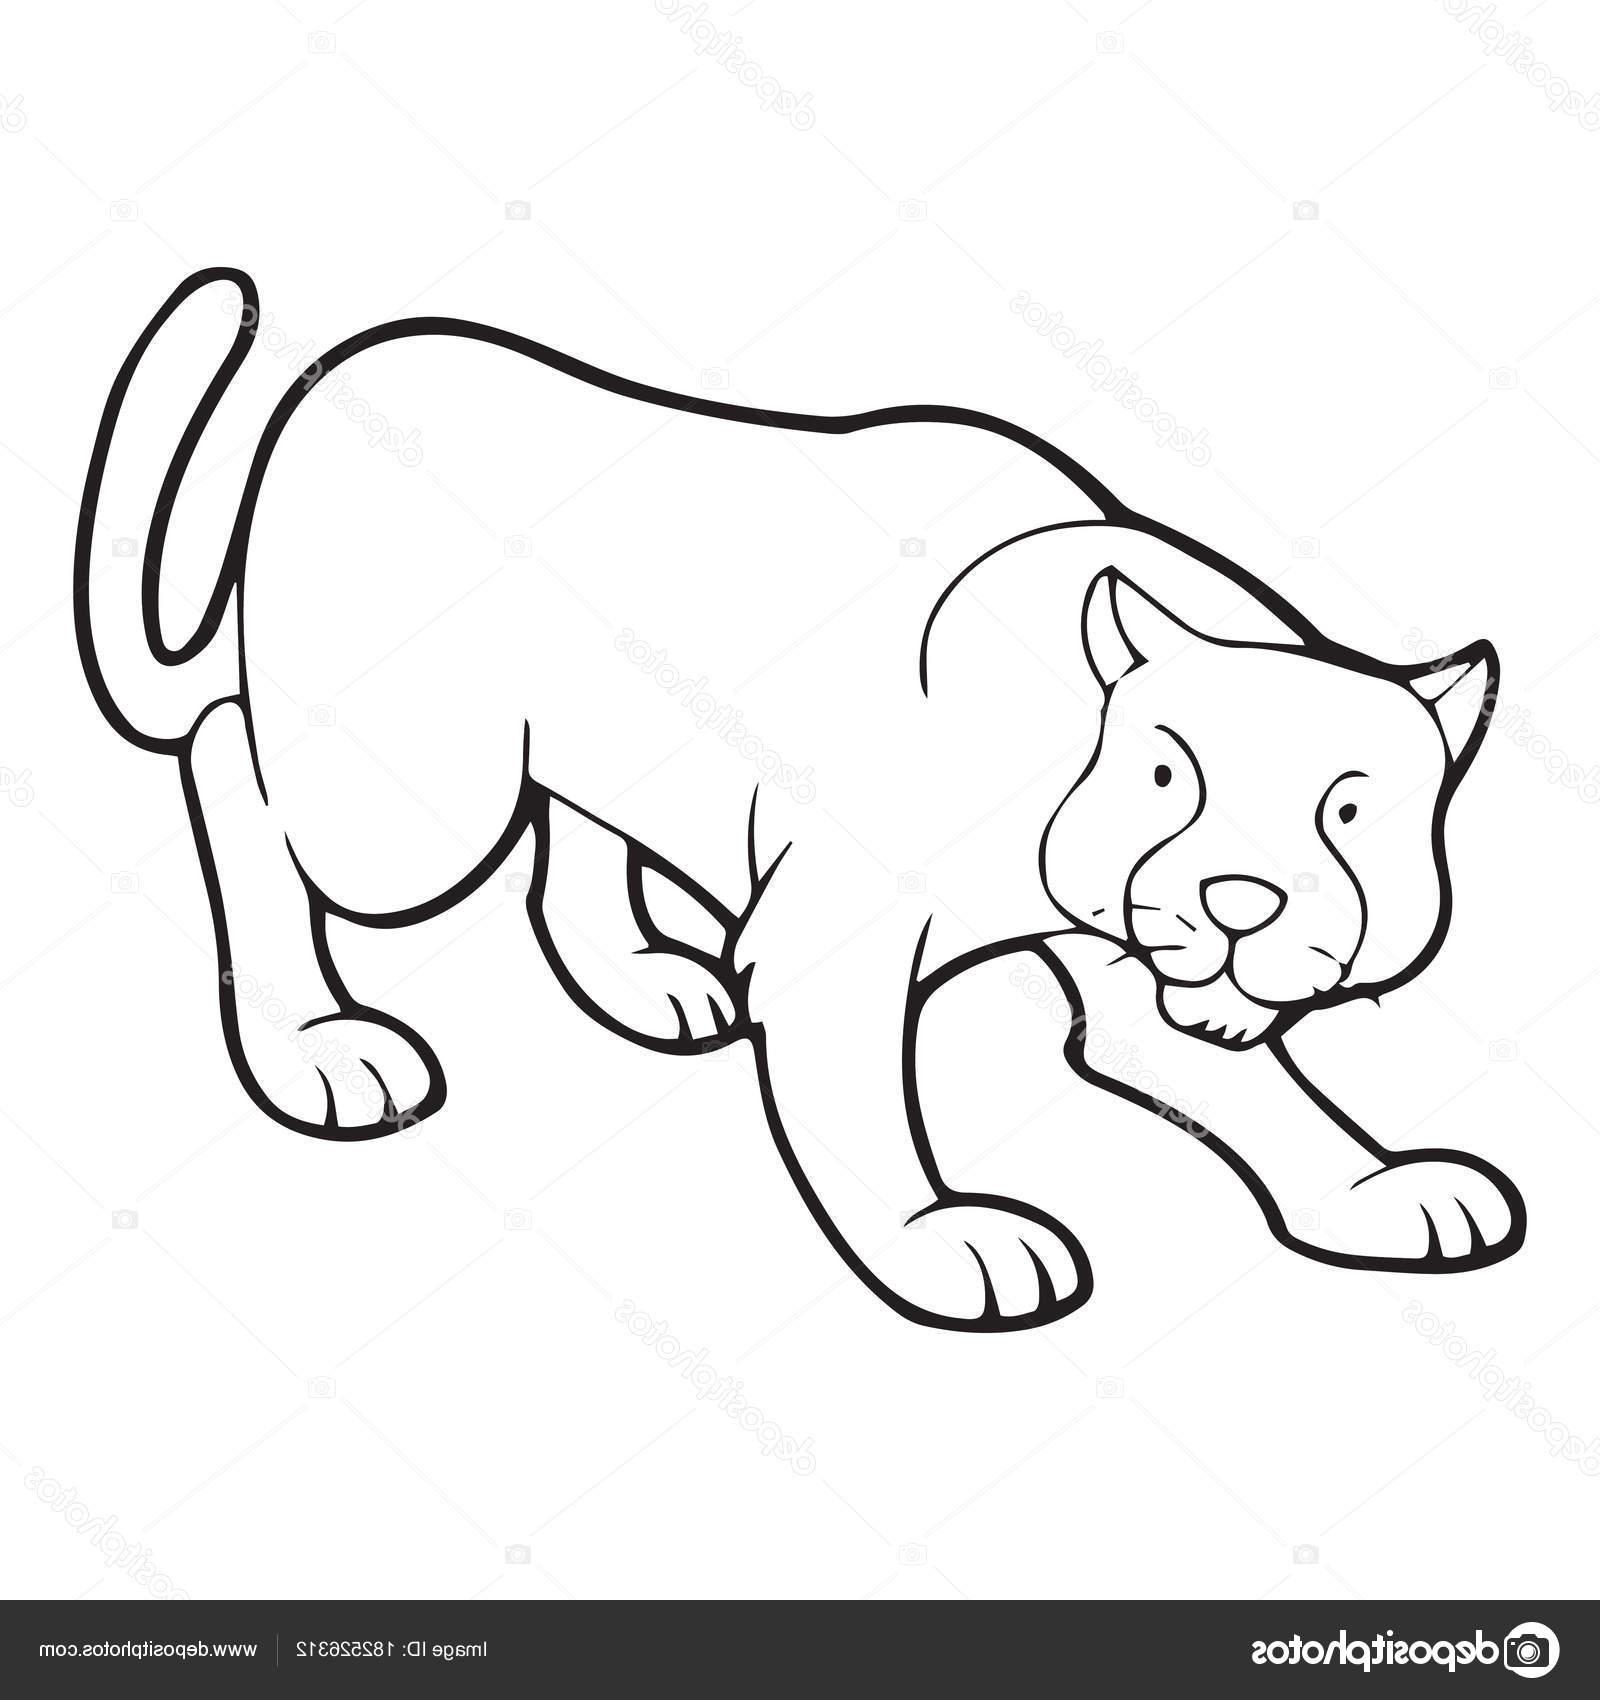 panther clipart friendly